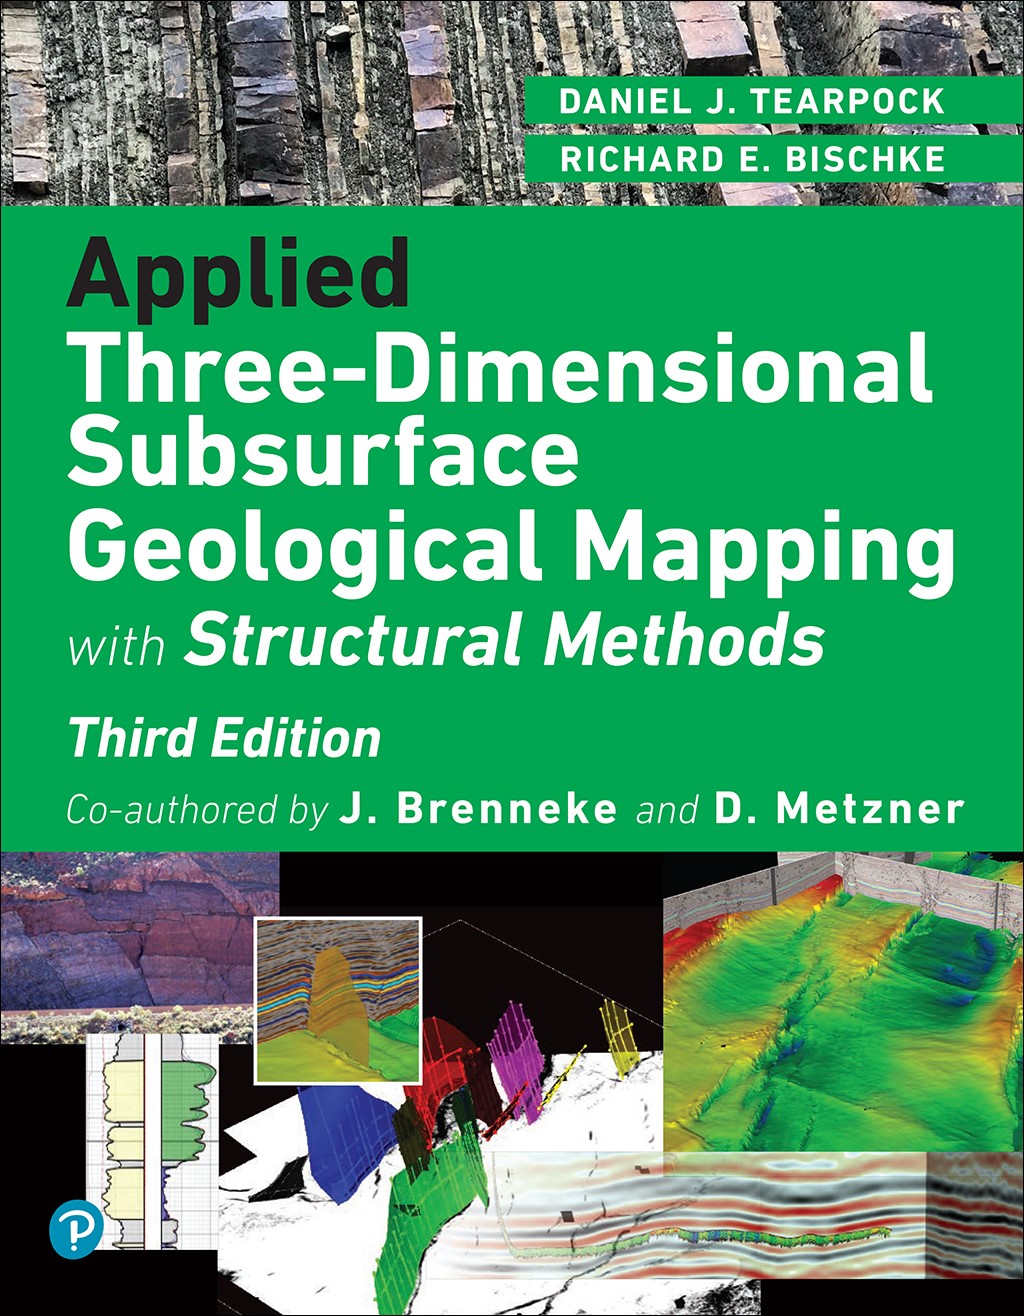 Applied Three-Dimensional Subsurface Geological Mapping: With Structural Methods, 3rd Edition